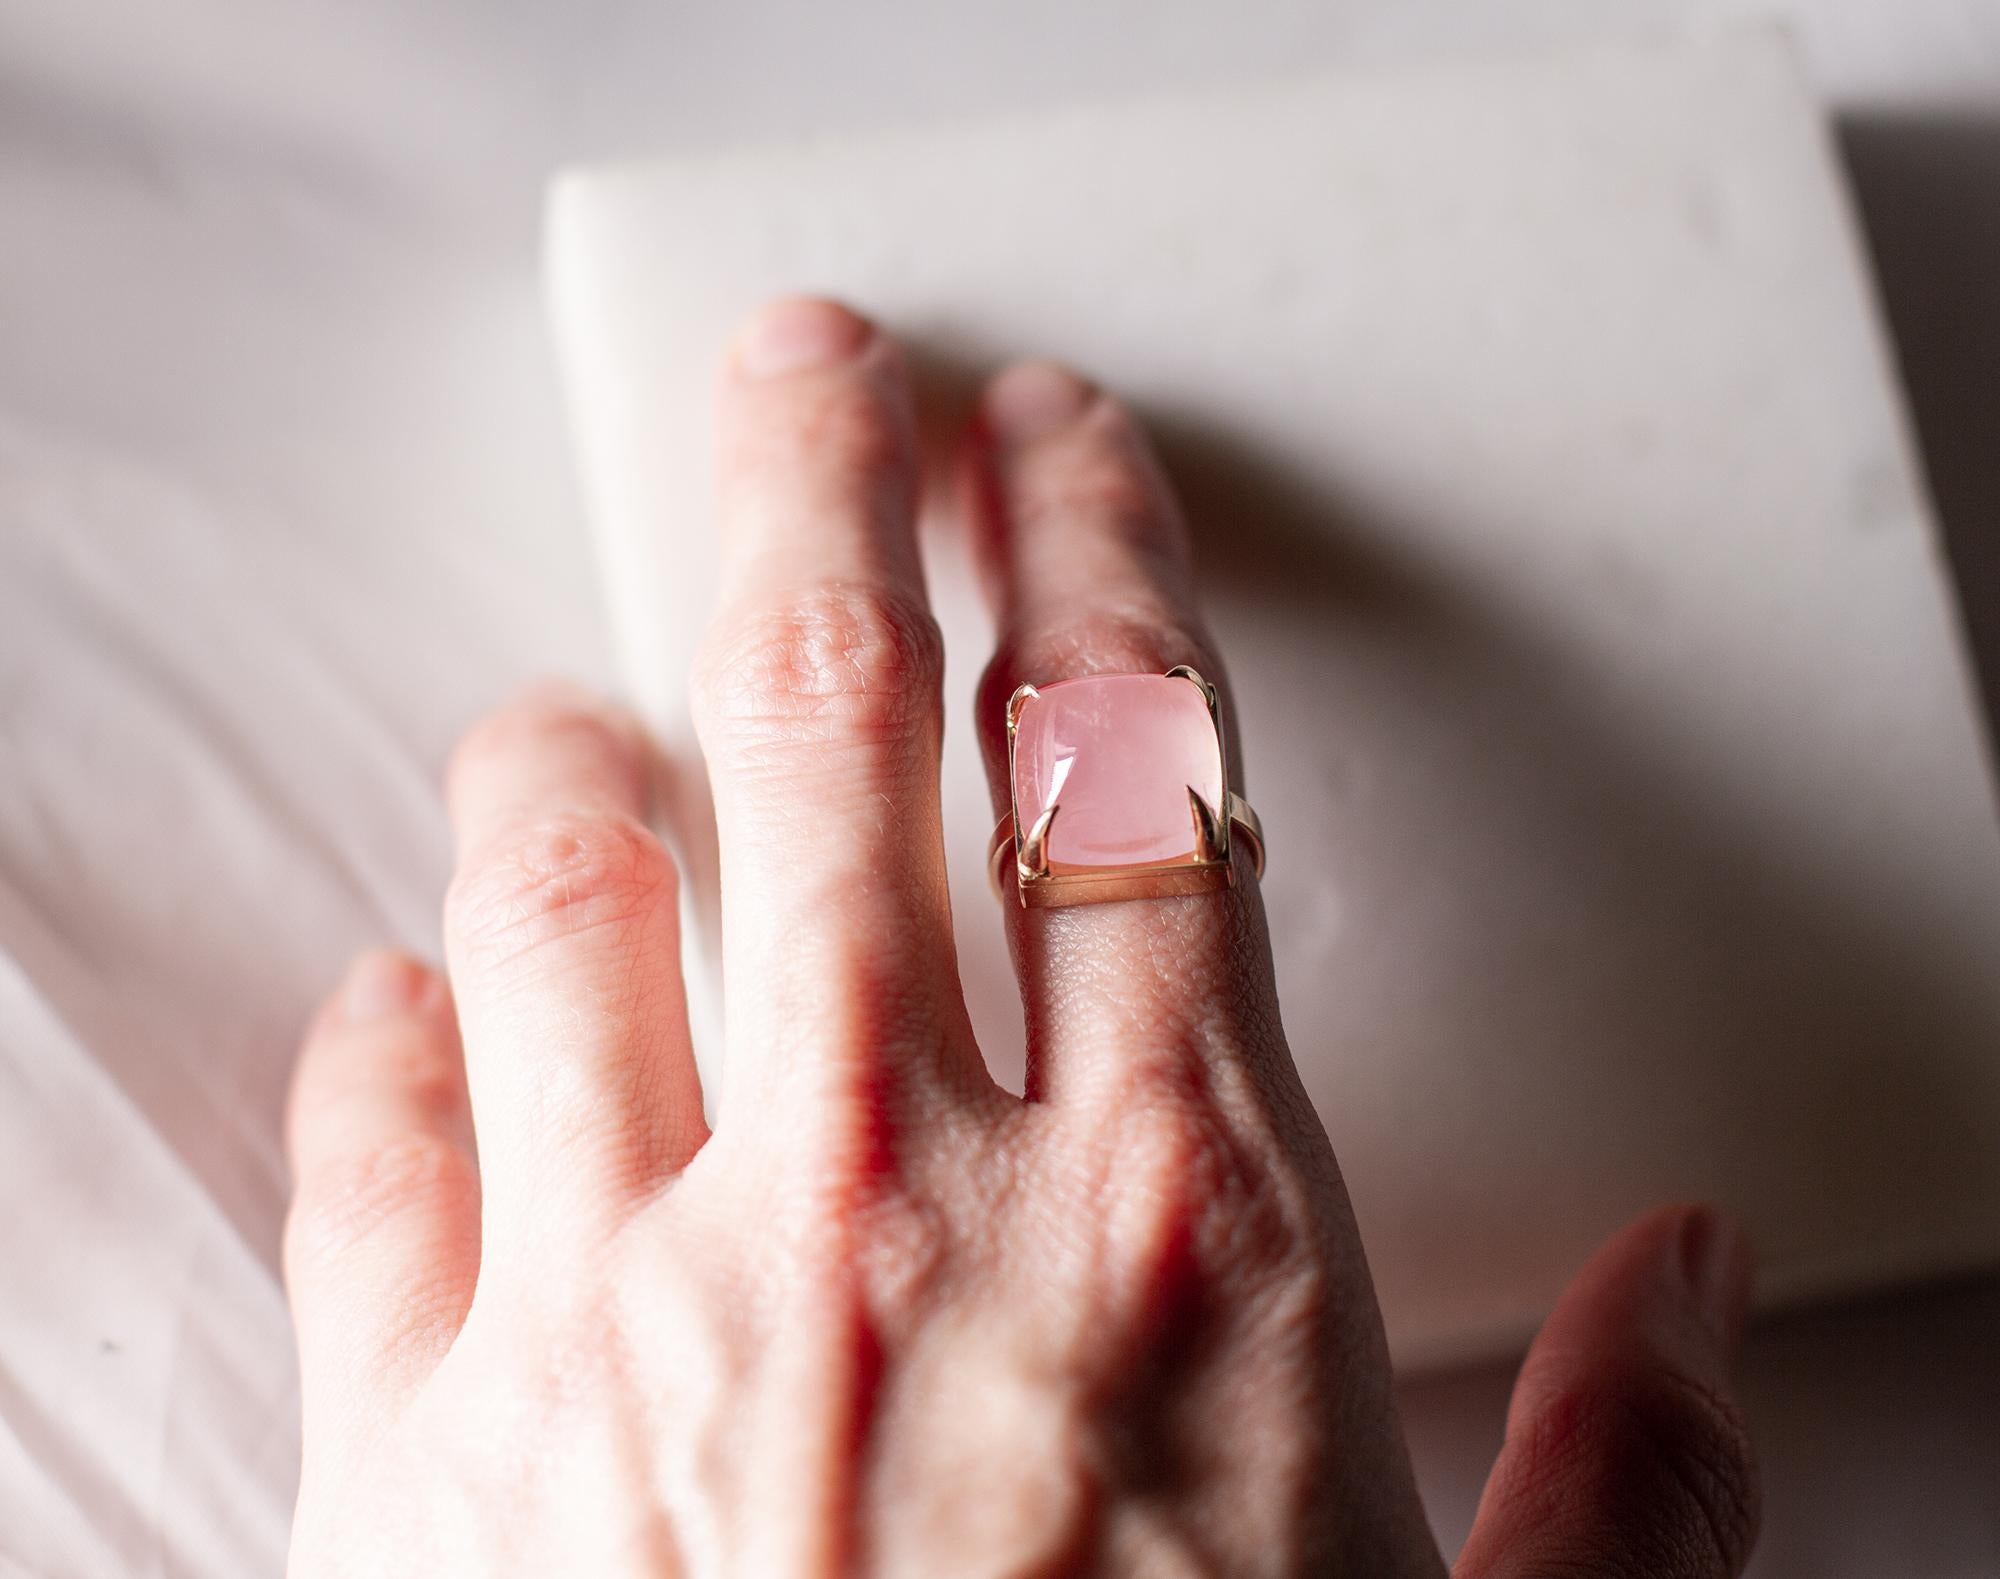 This ring is made of 18 karat yellow gold with a sugarloaf cut natural light pink quartz.

Typically, the smaller the prongs, the better for most gems. However, we wanted to avoid the typical childish look that often occurs with sugarloaf gems that